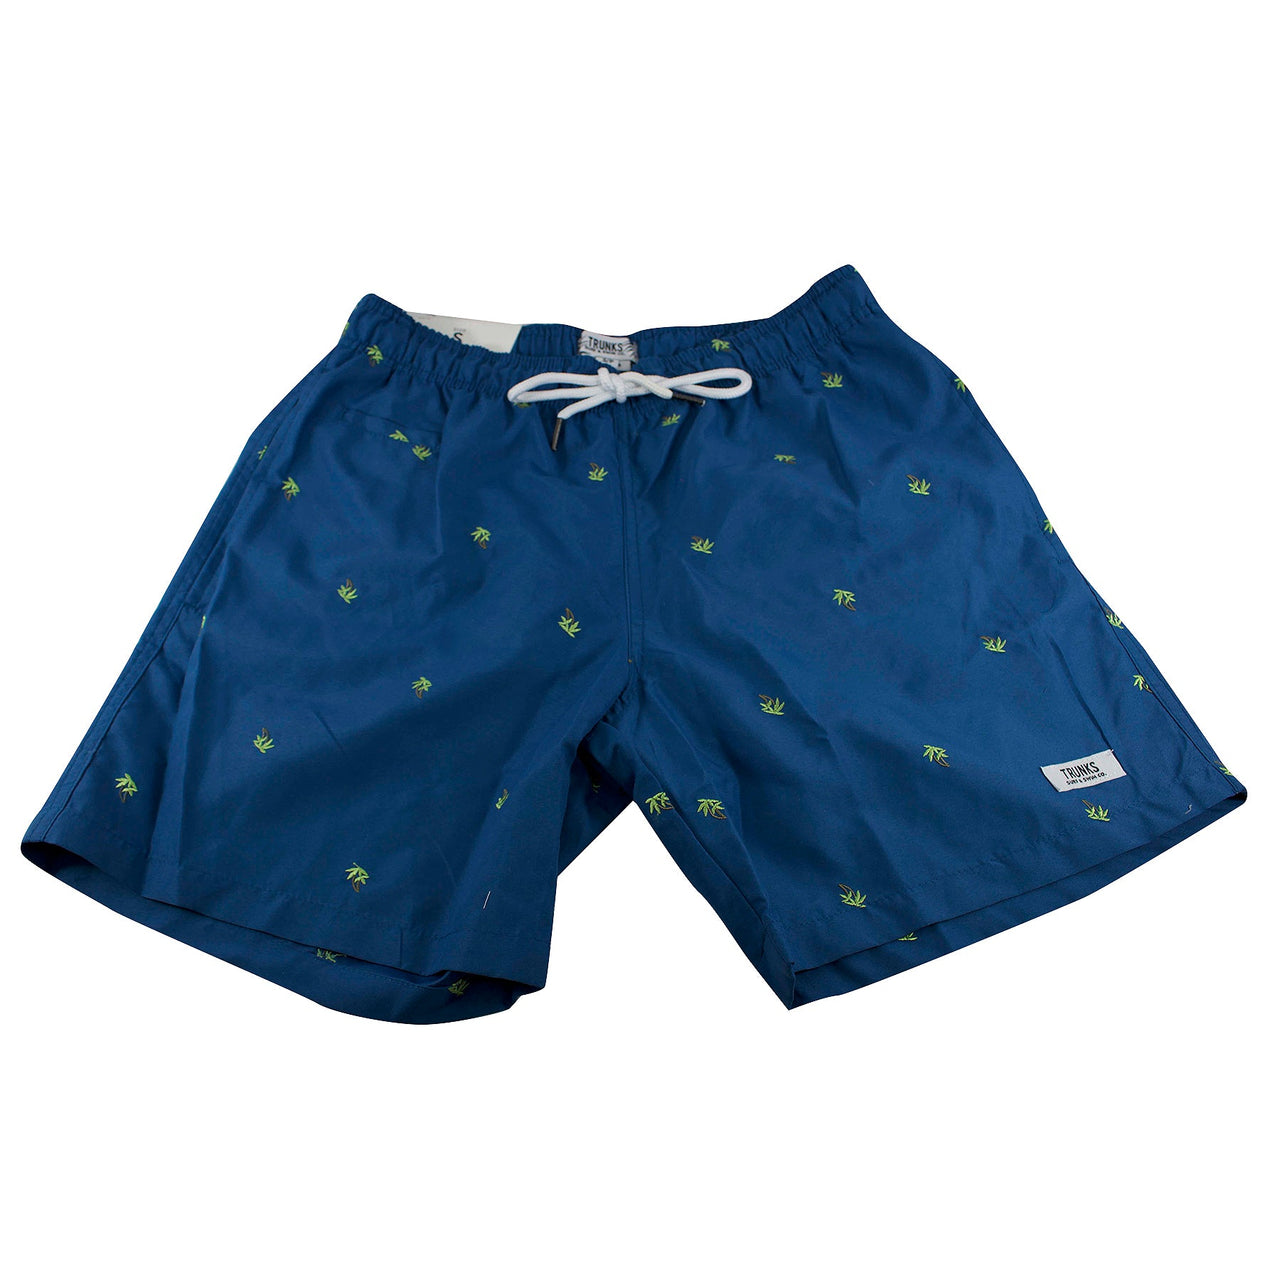 The Trunk Surf and Swim Co Embroidered Palm Tree Swim Shorts are blue with small palm trees embroidered throughout the short